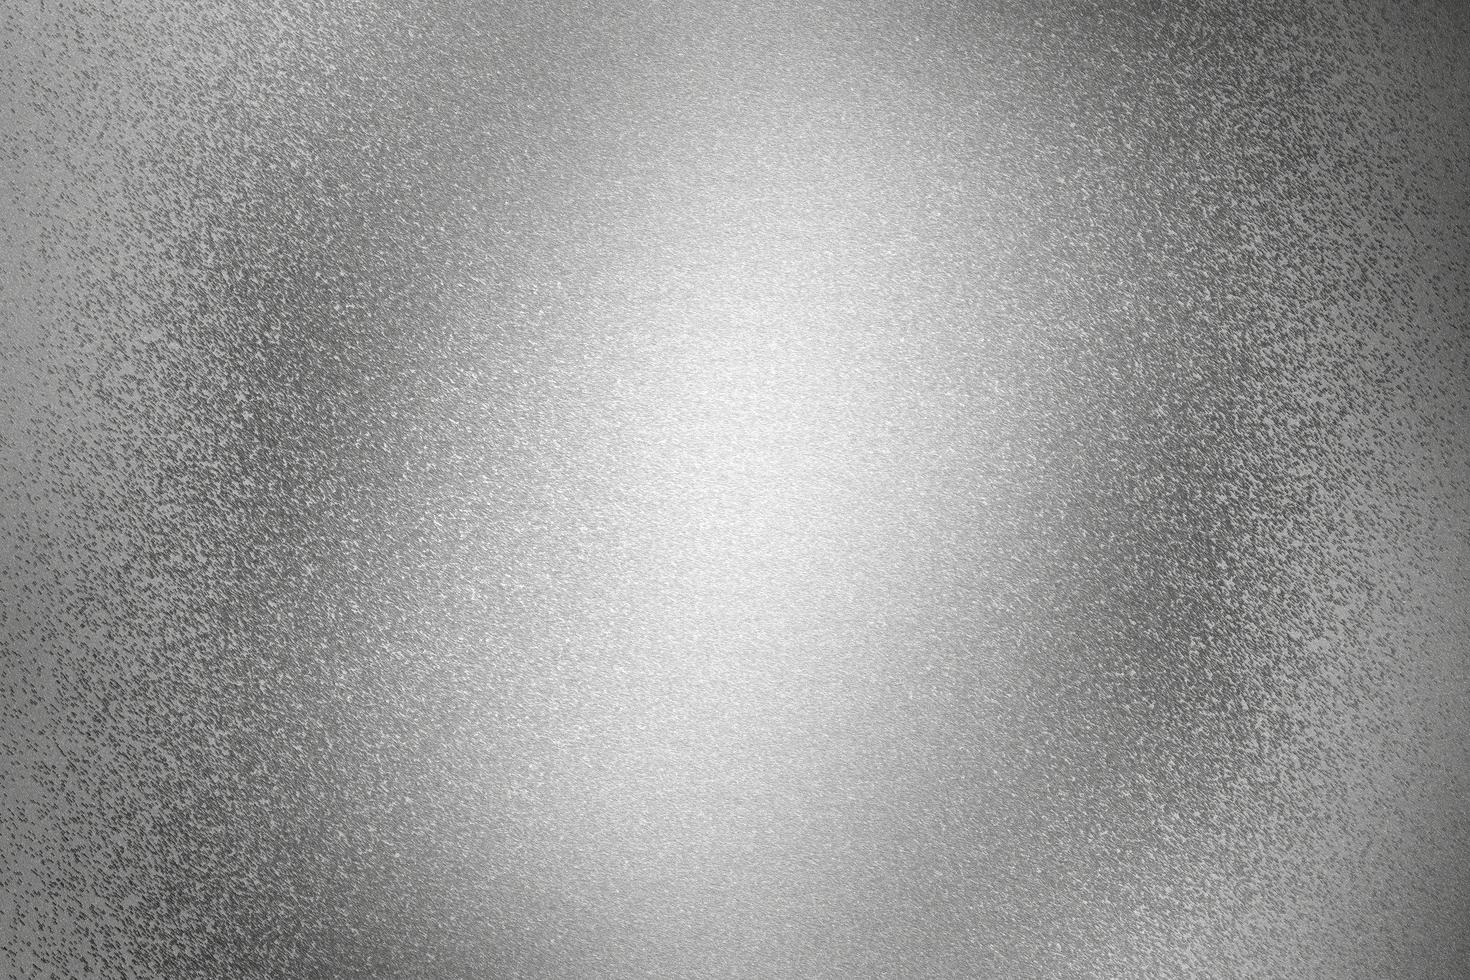 Glowing Silver Foil Metal Wall Surface Abstract Texture Background Stock  Photo - Download Image Now - iStock